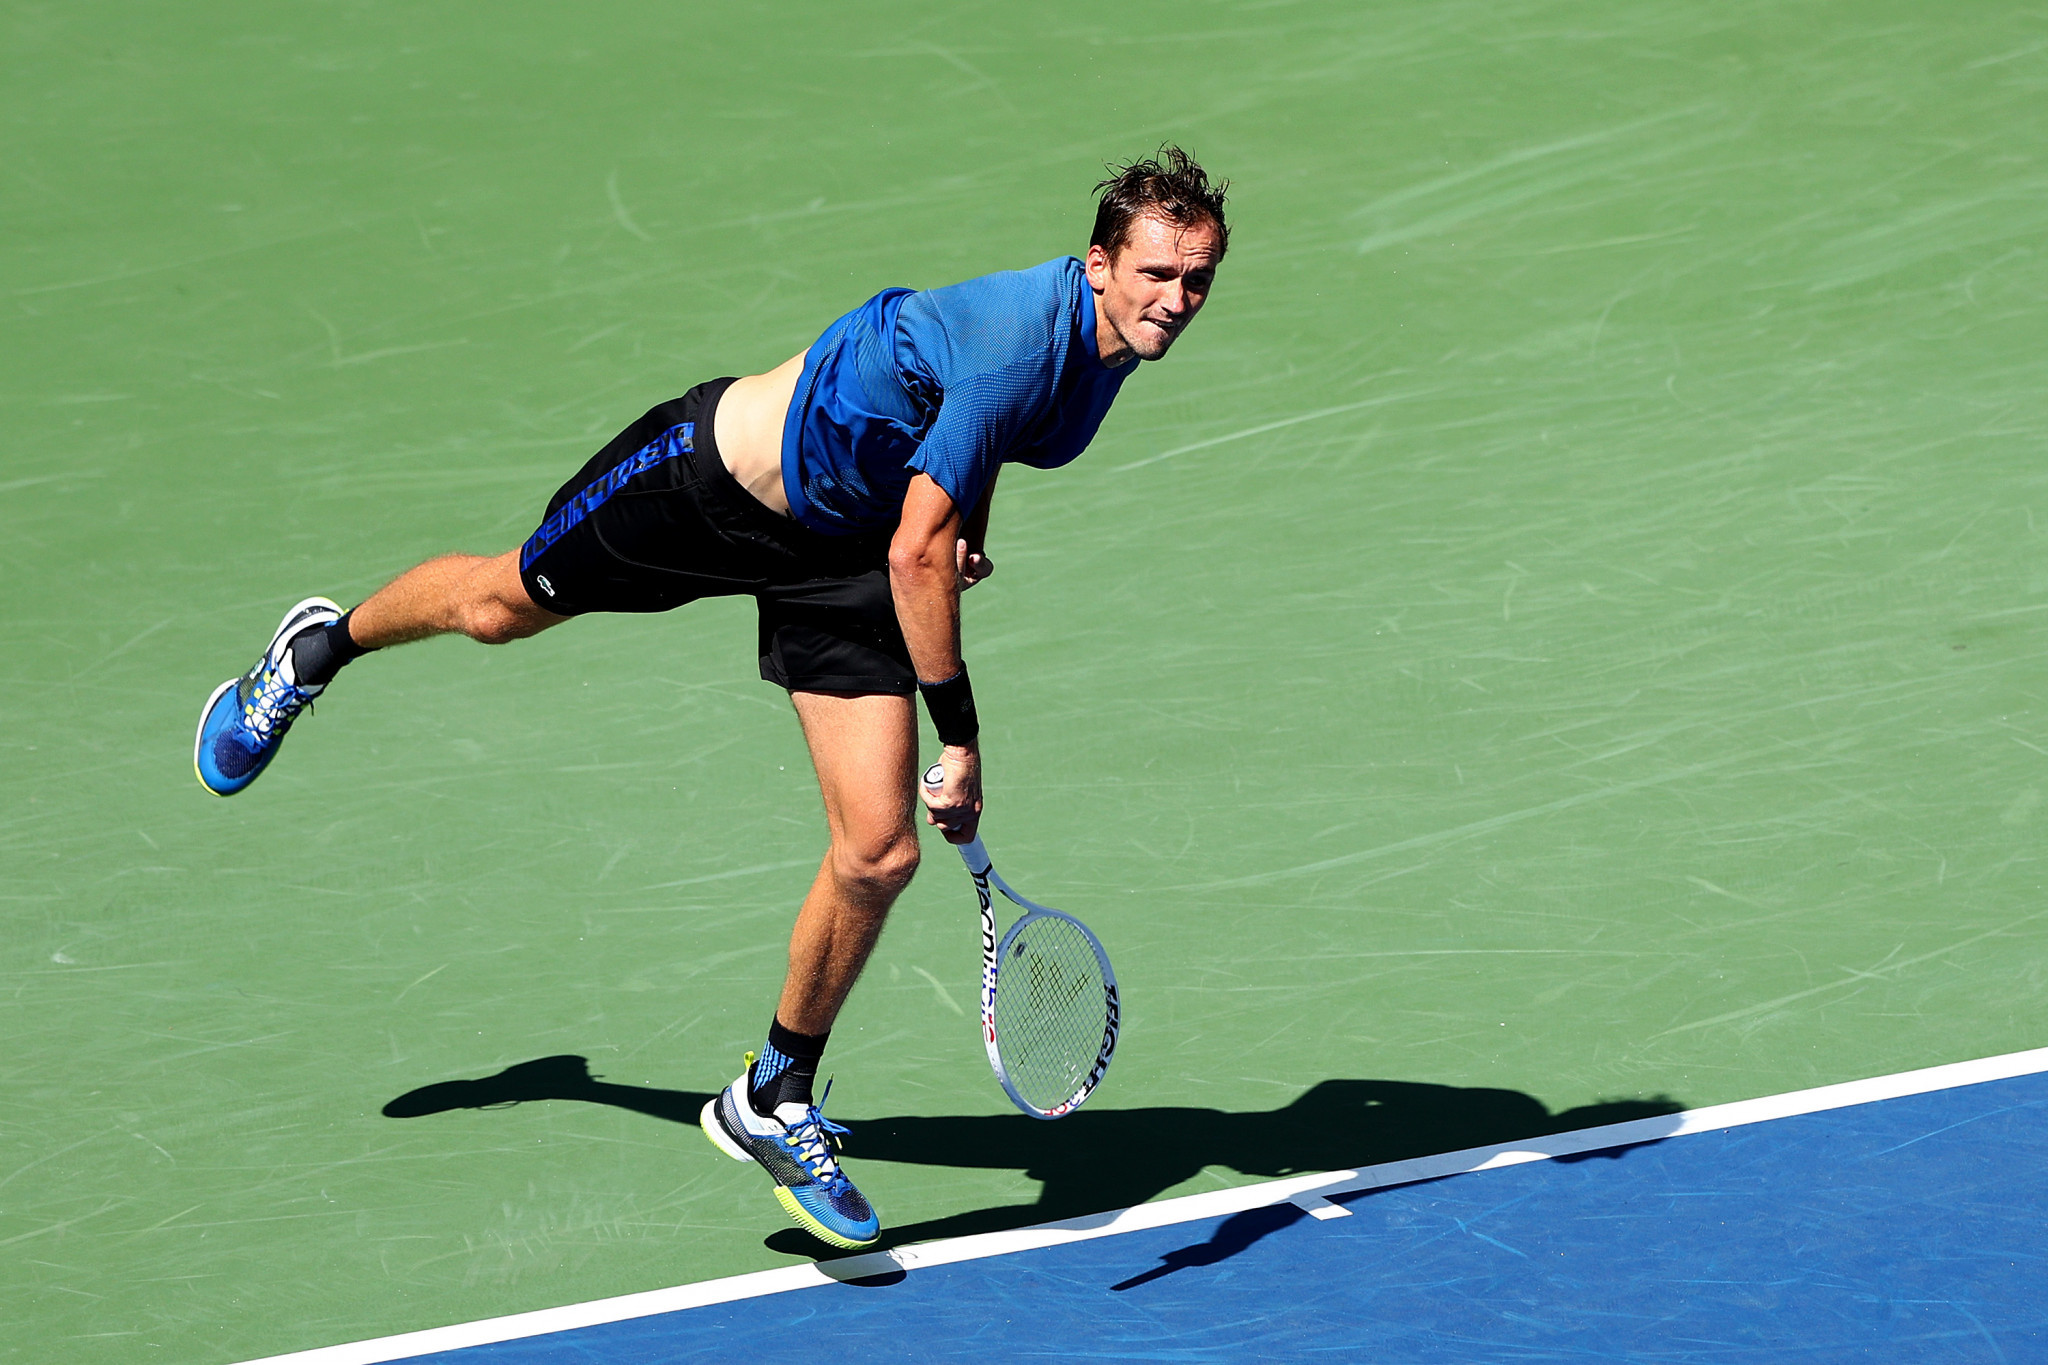 Defending champion Daniil Medvedev started with a bang as he ousted American Stefan Kozlov in the first round ©Getty Images